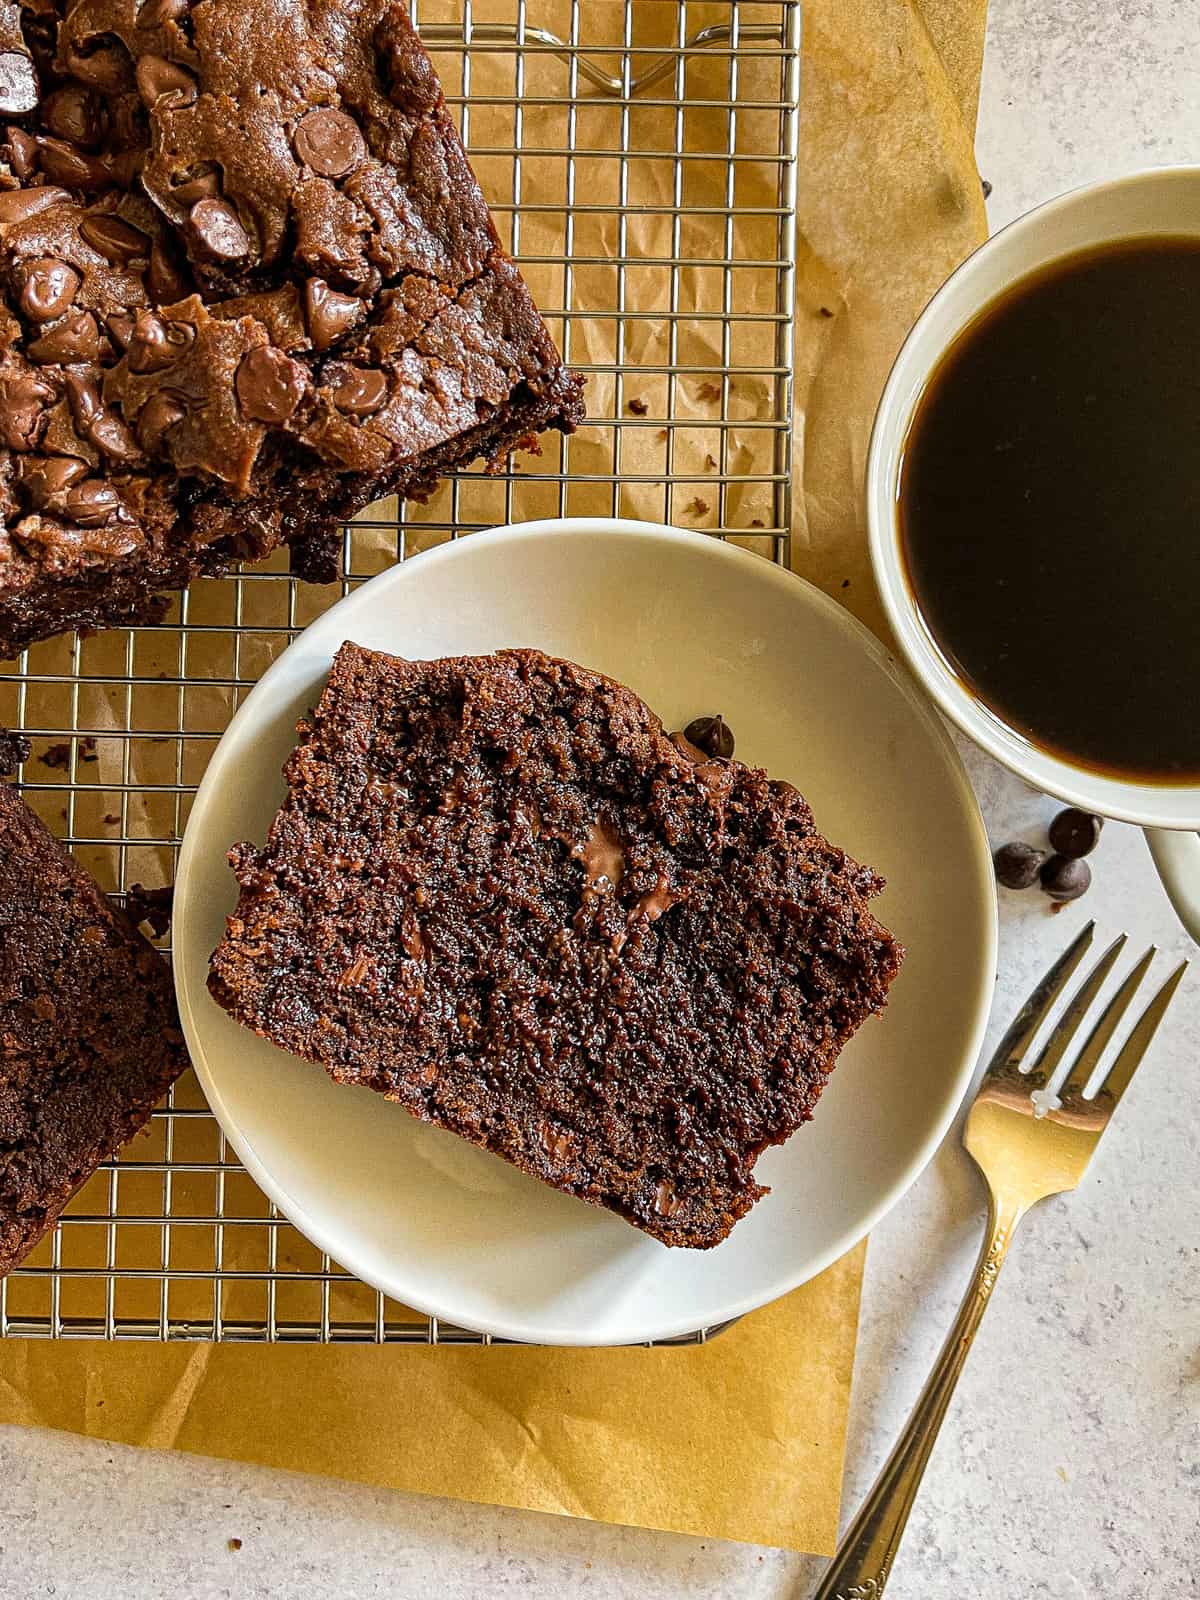 slice of chocolate chocolate chip bread on a cooling rack, flanked by serving forks, plates, and a cup of black coffee